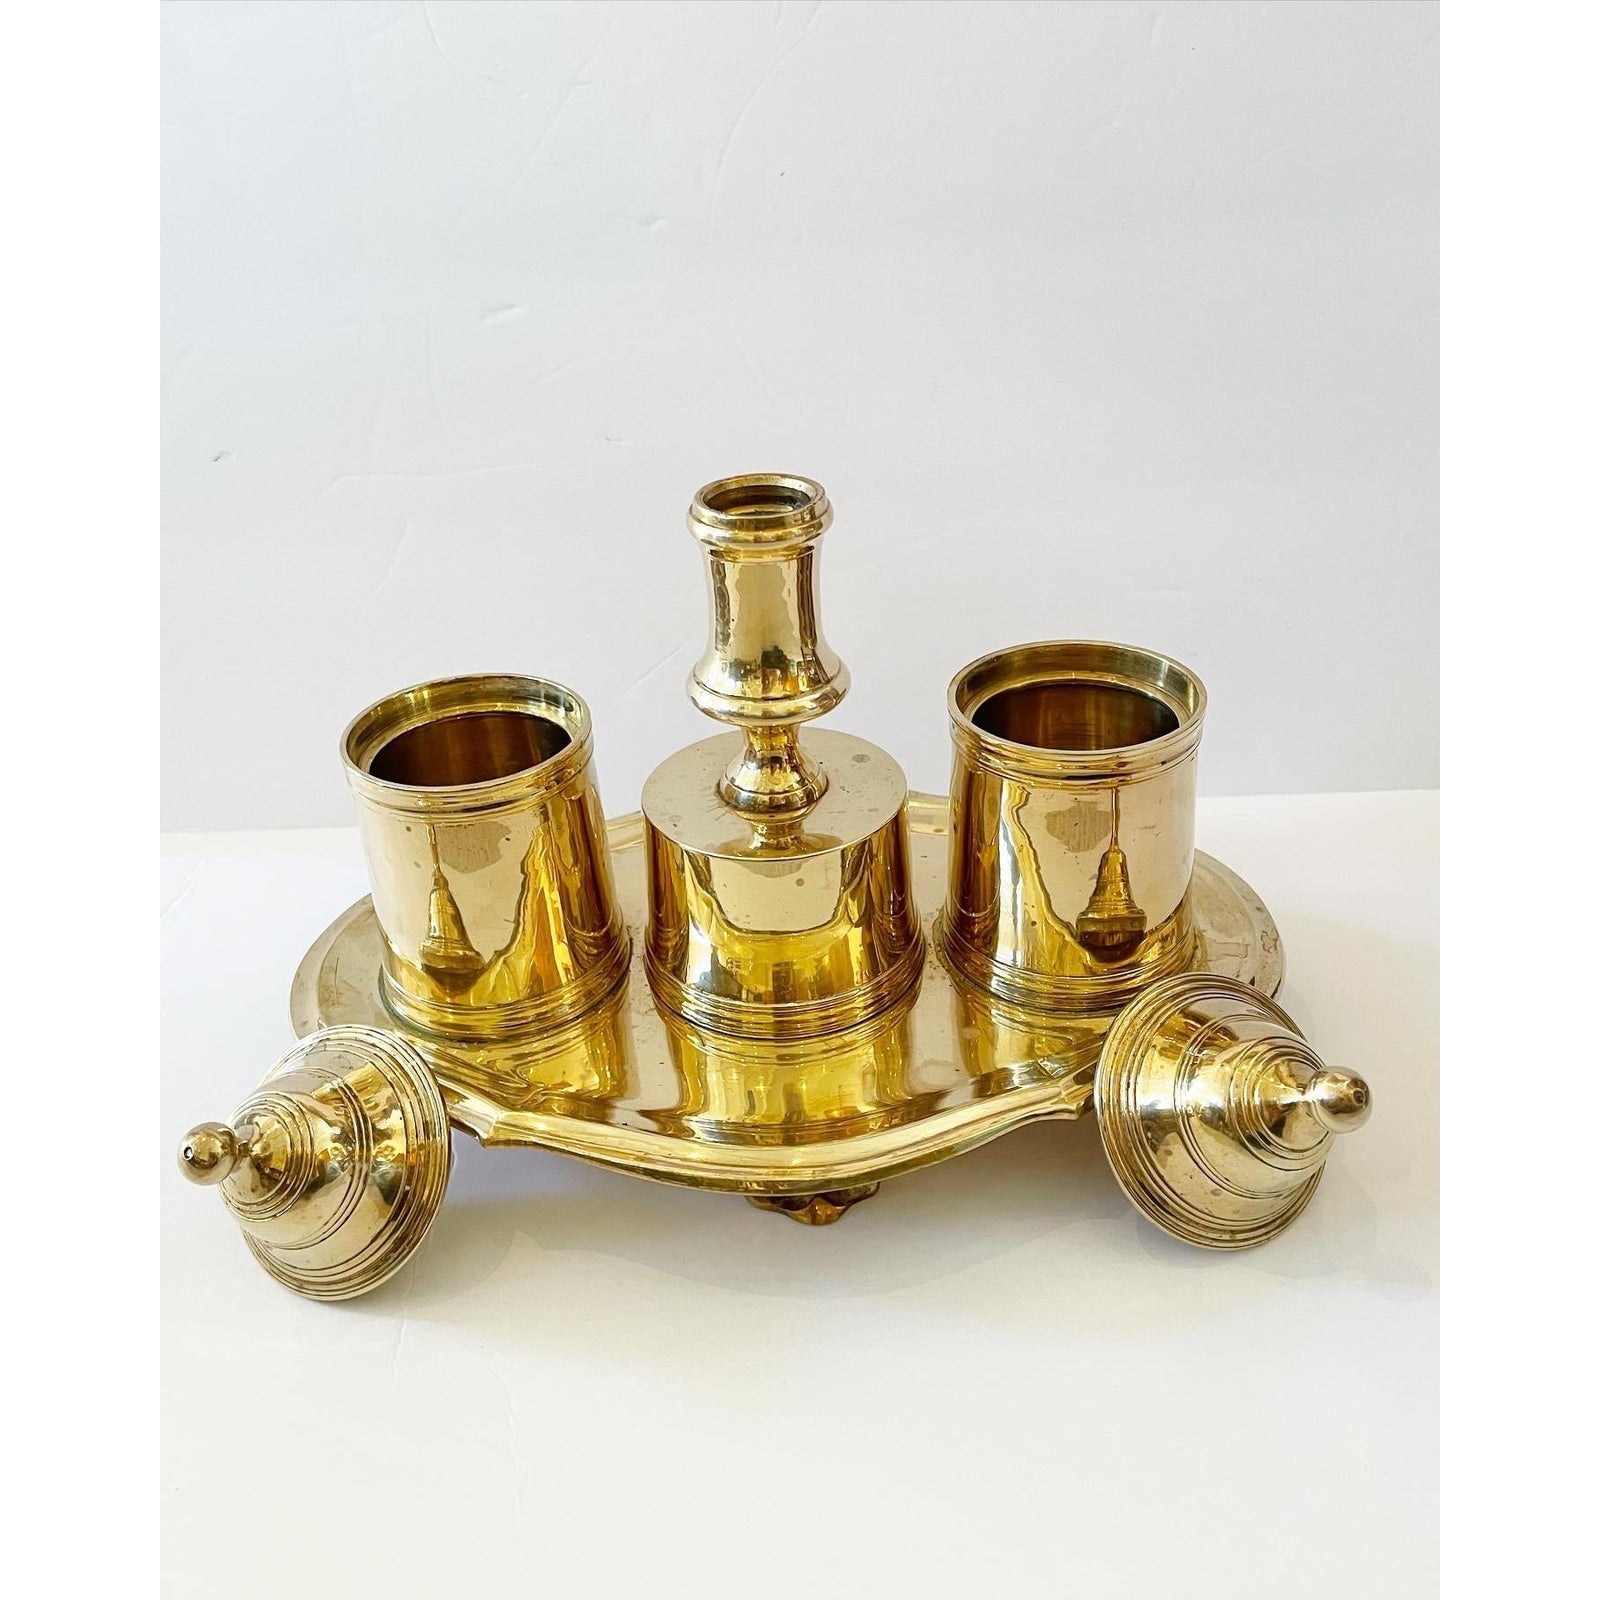 5 Vintage Brass Candlestick Holders / Set of Footed Candle Holders